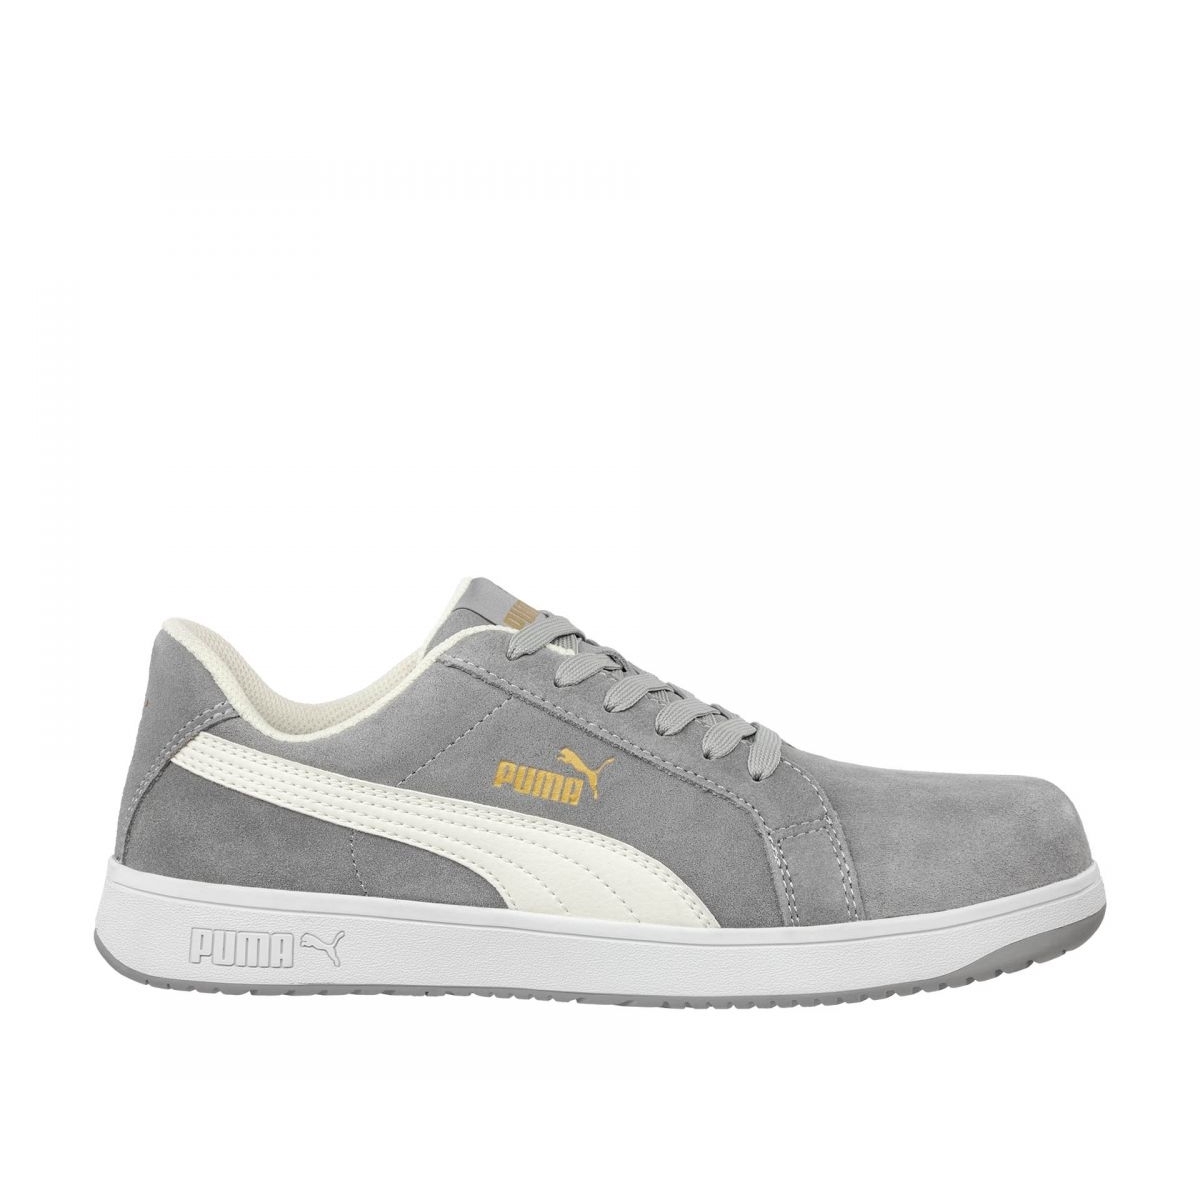 PUMA Safety Women's Iconic Low Composite Toe SD Work Shoes Grey Suede - 640125 Grey - Grey, 7